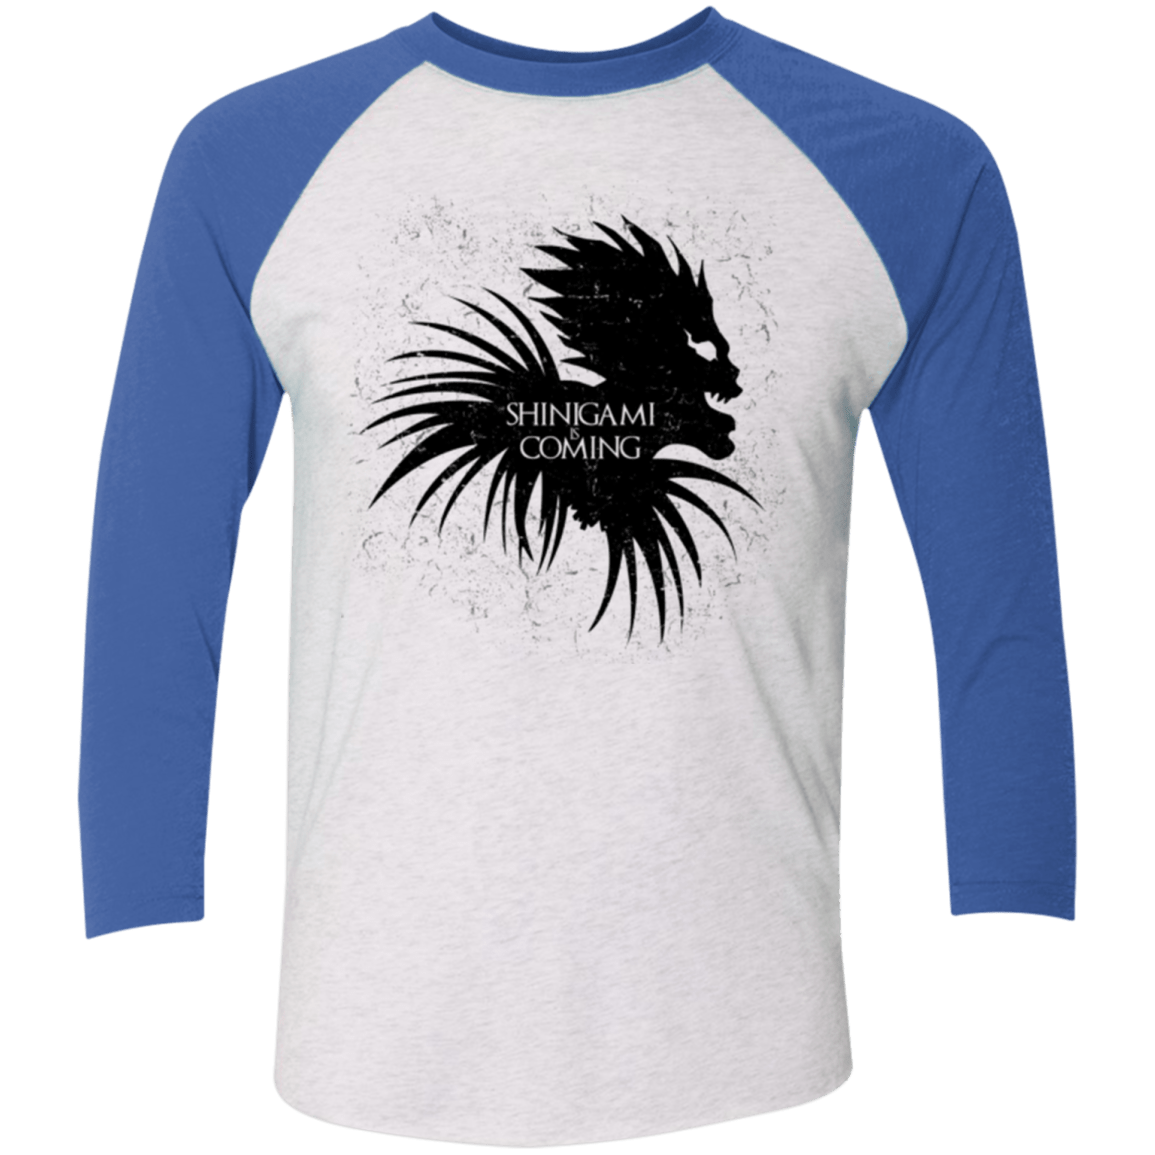 T-Shirts Heather White/Vintage Royal / X-Small Shinigami Is Coming Men's Triblend 3/4 Sleeve